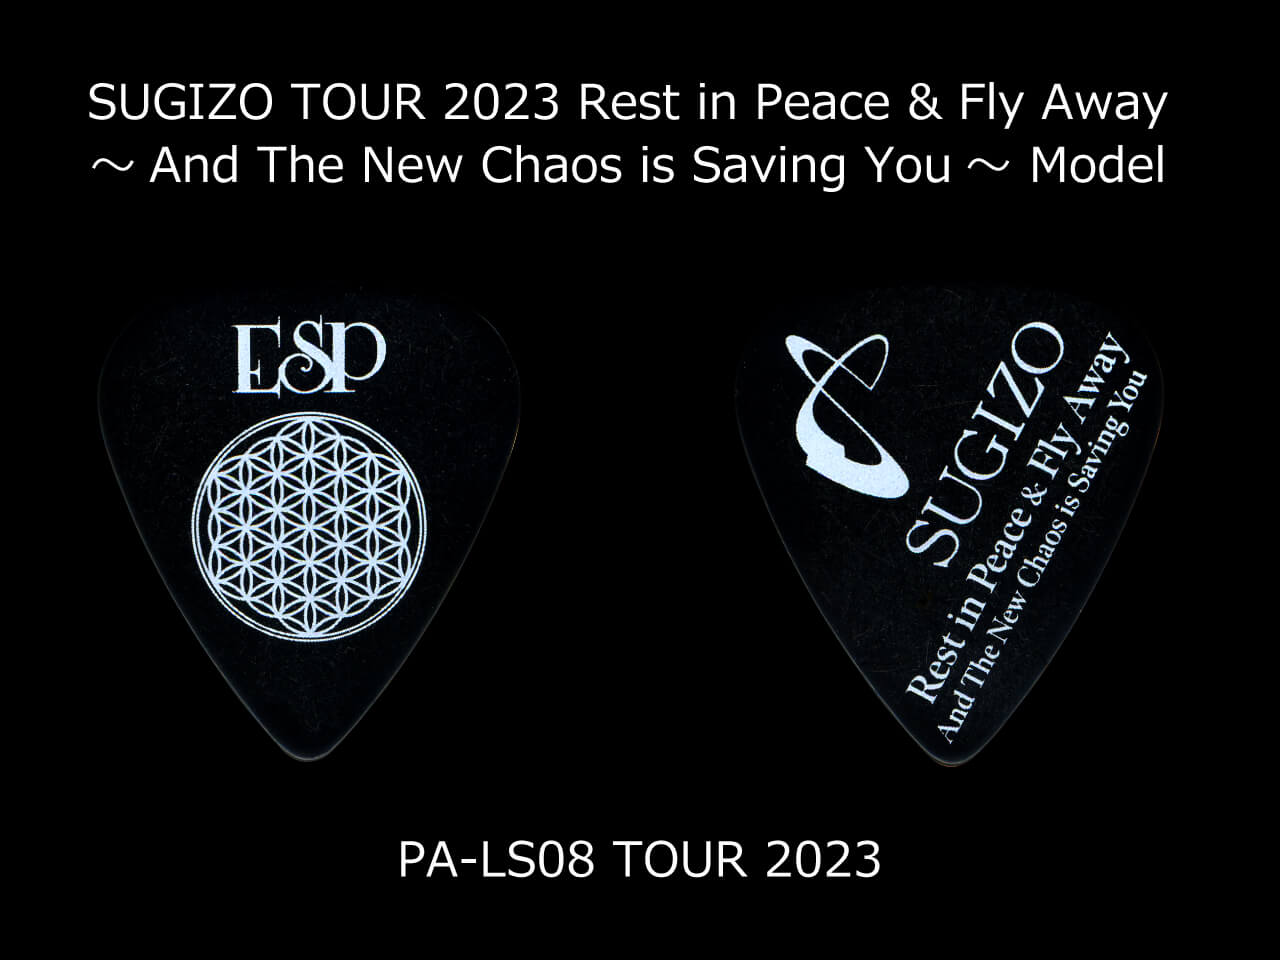 ESP(イーエスピー) Artist Pick Series PA-LS08 TOUR 2023 SUGIZO TOUR 2023 Rest in Peace & Fly Away ～And The New Chaos is Saving You～ Model (LUNA SEA/SUGIZOモデル)